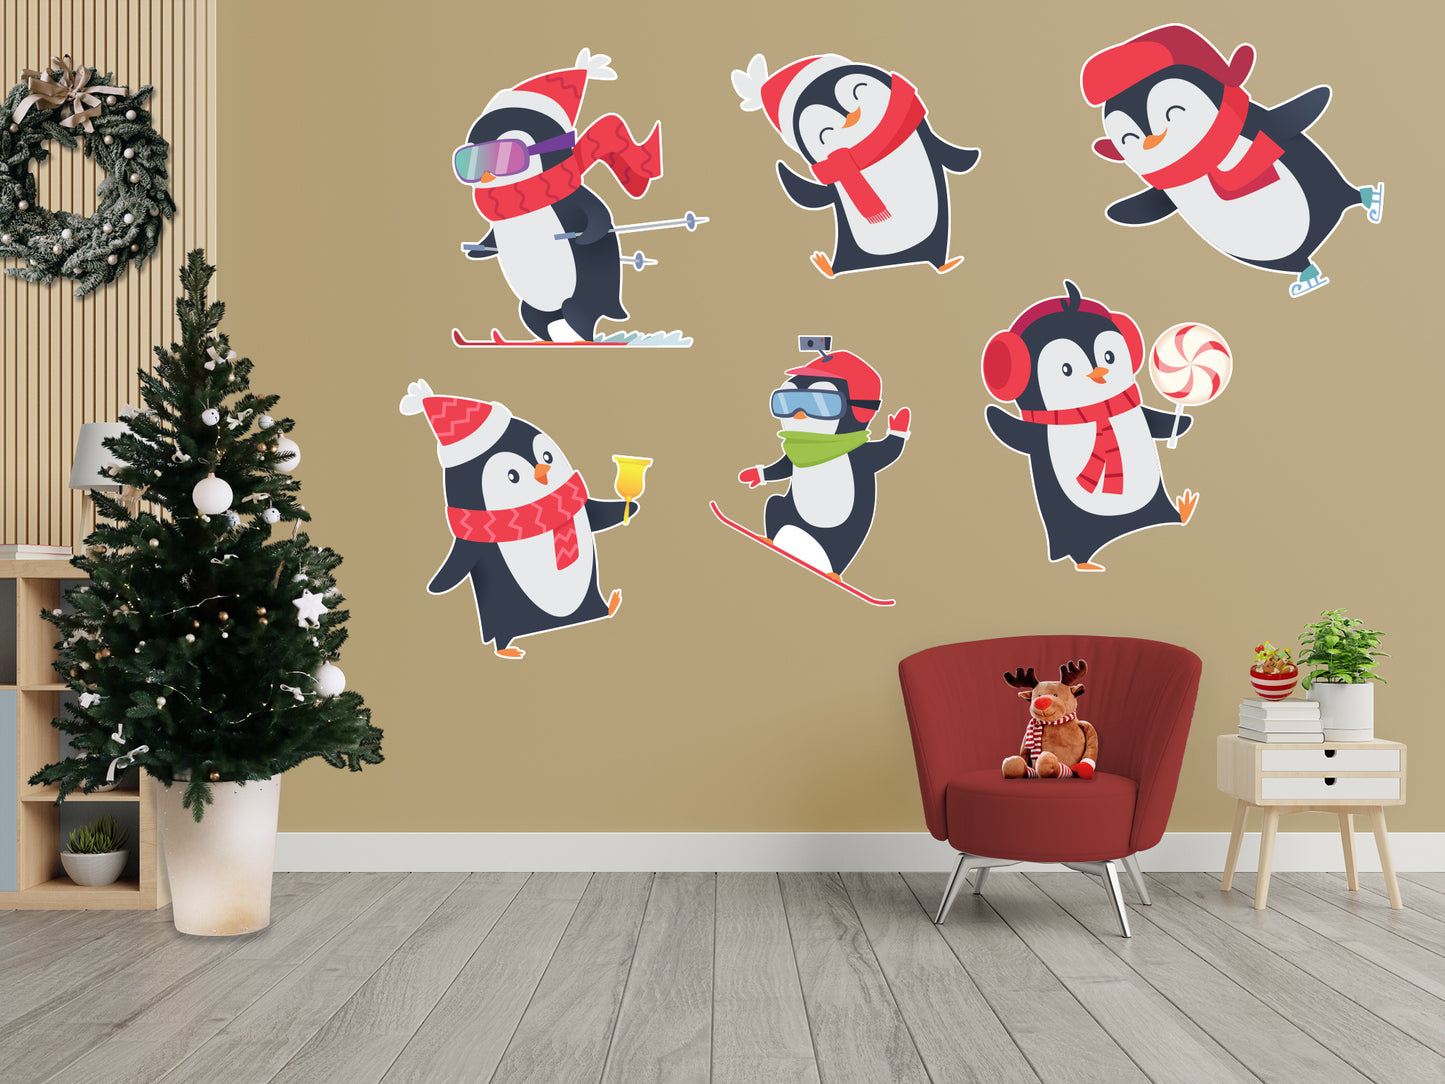 Seasons Decor: Winter Six Penguins Collection - Removable Adhesive Decal